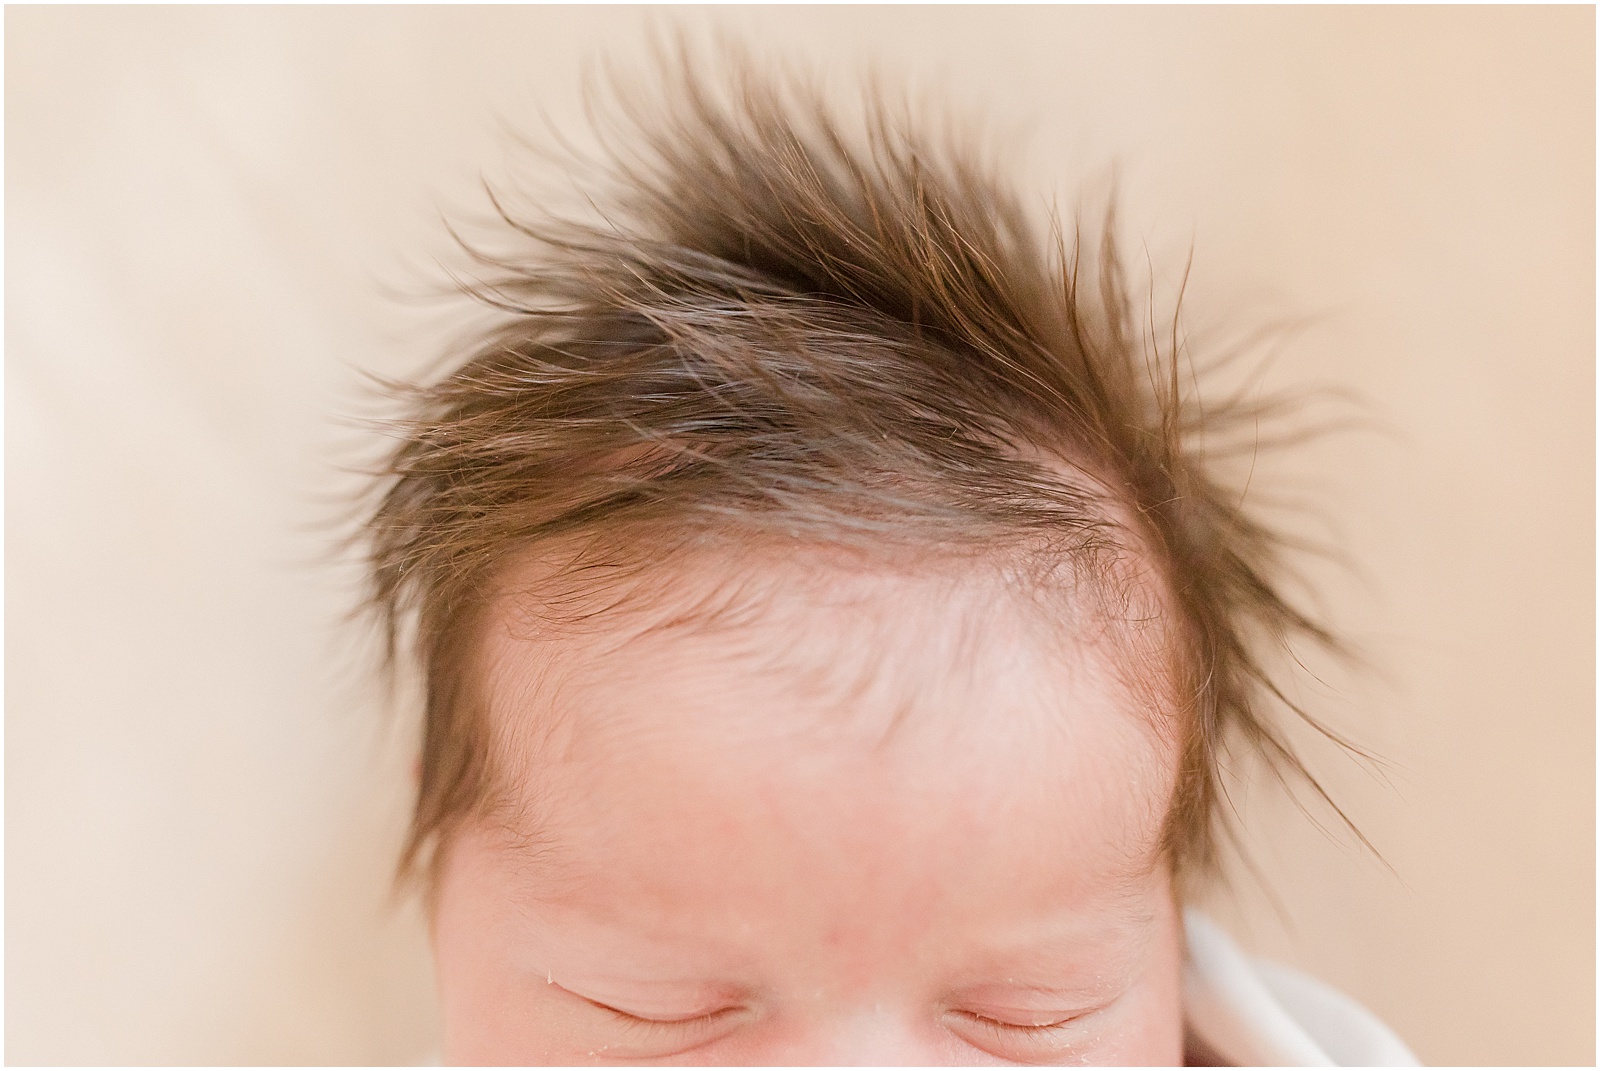 Newborn's hair by Greenville photographer Molly Hensley